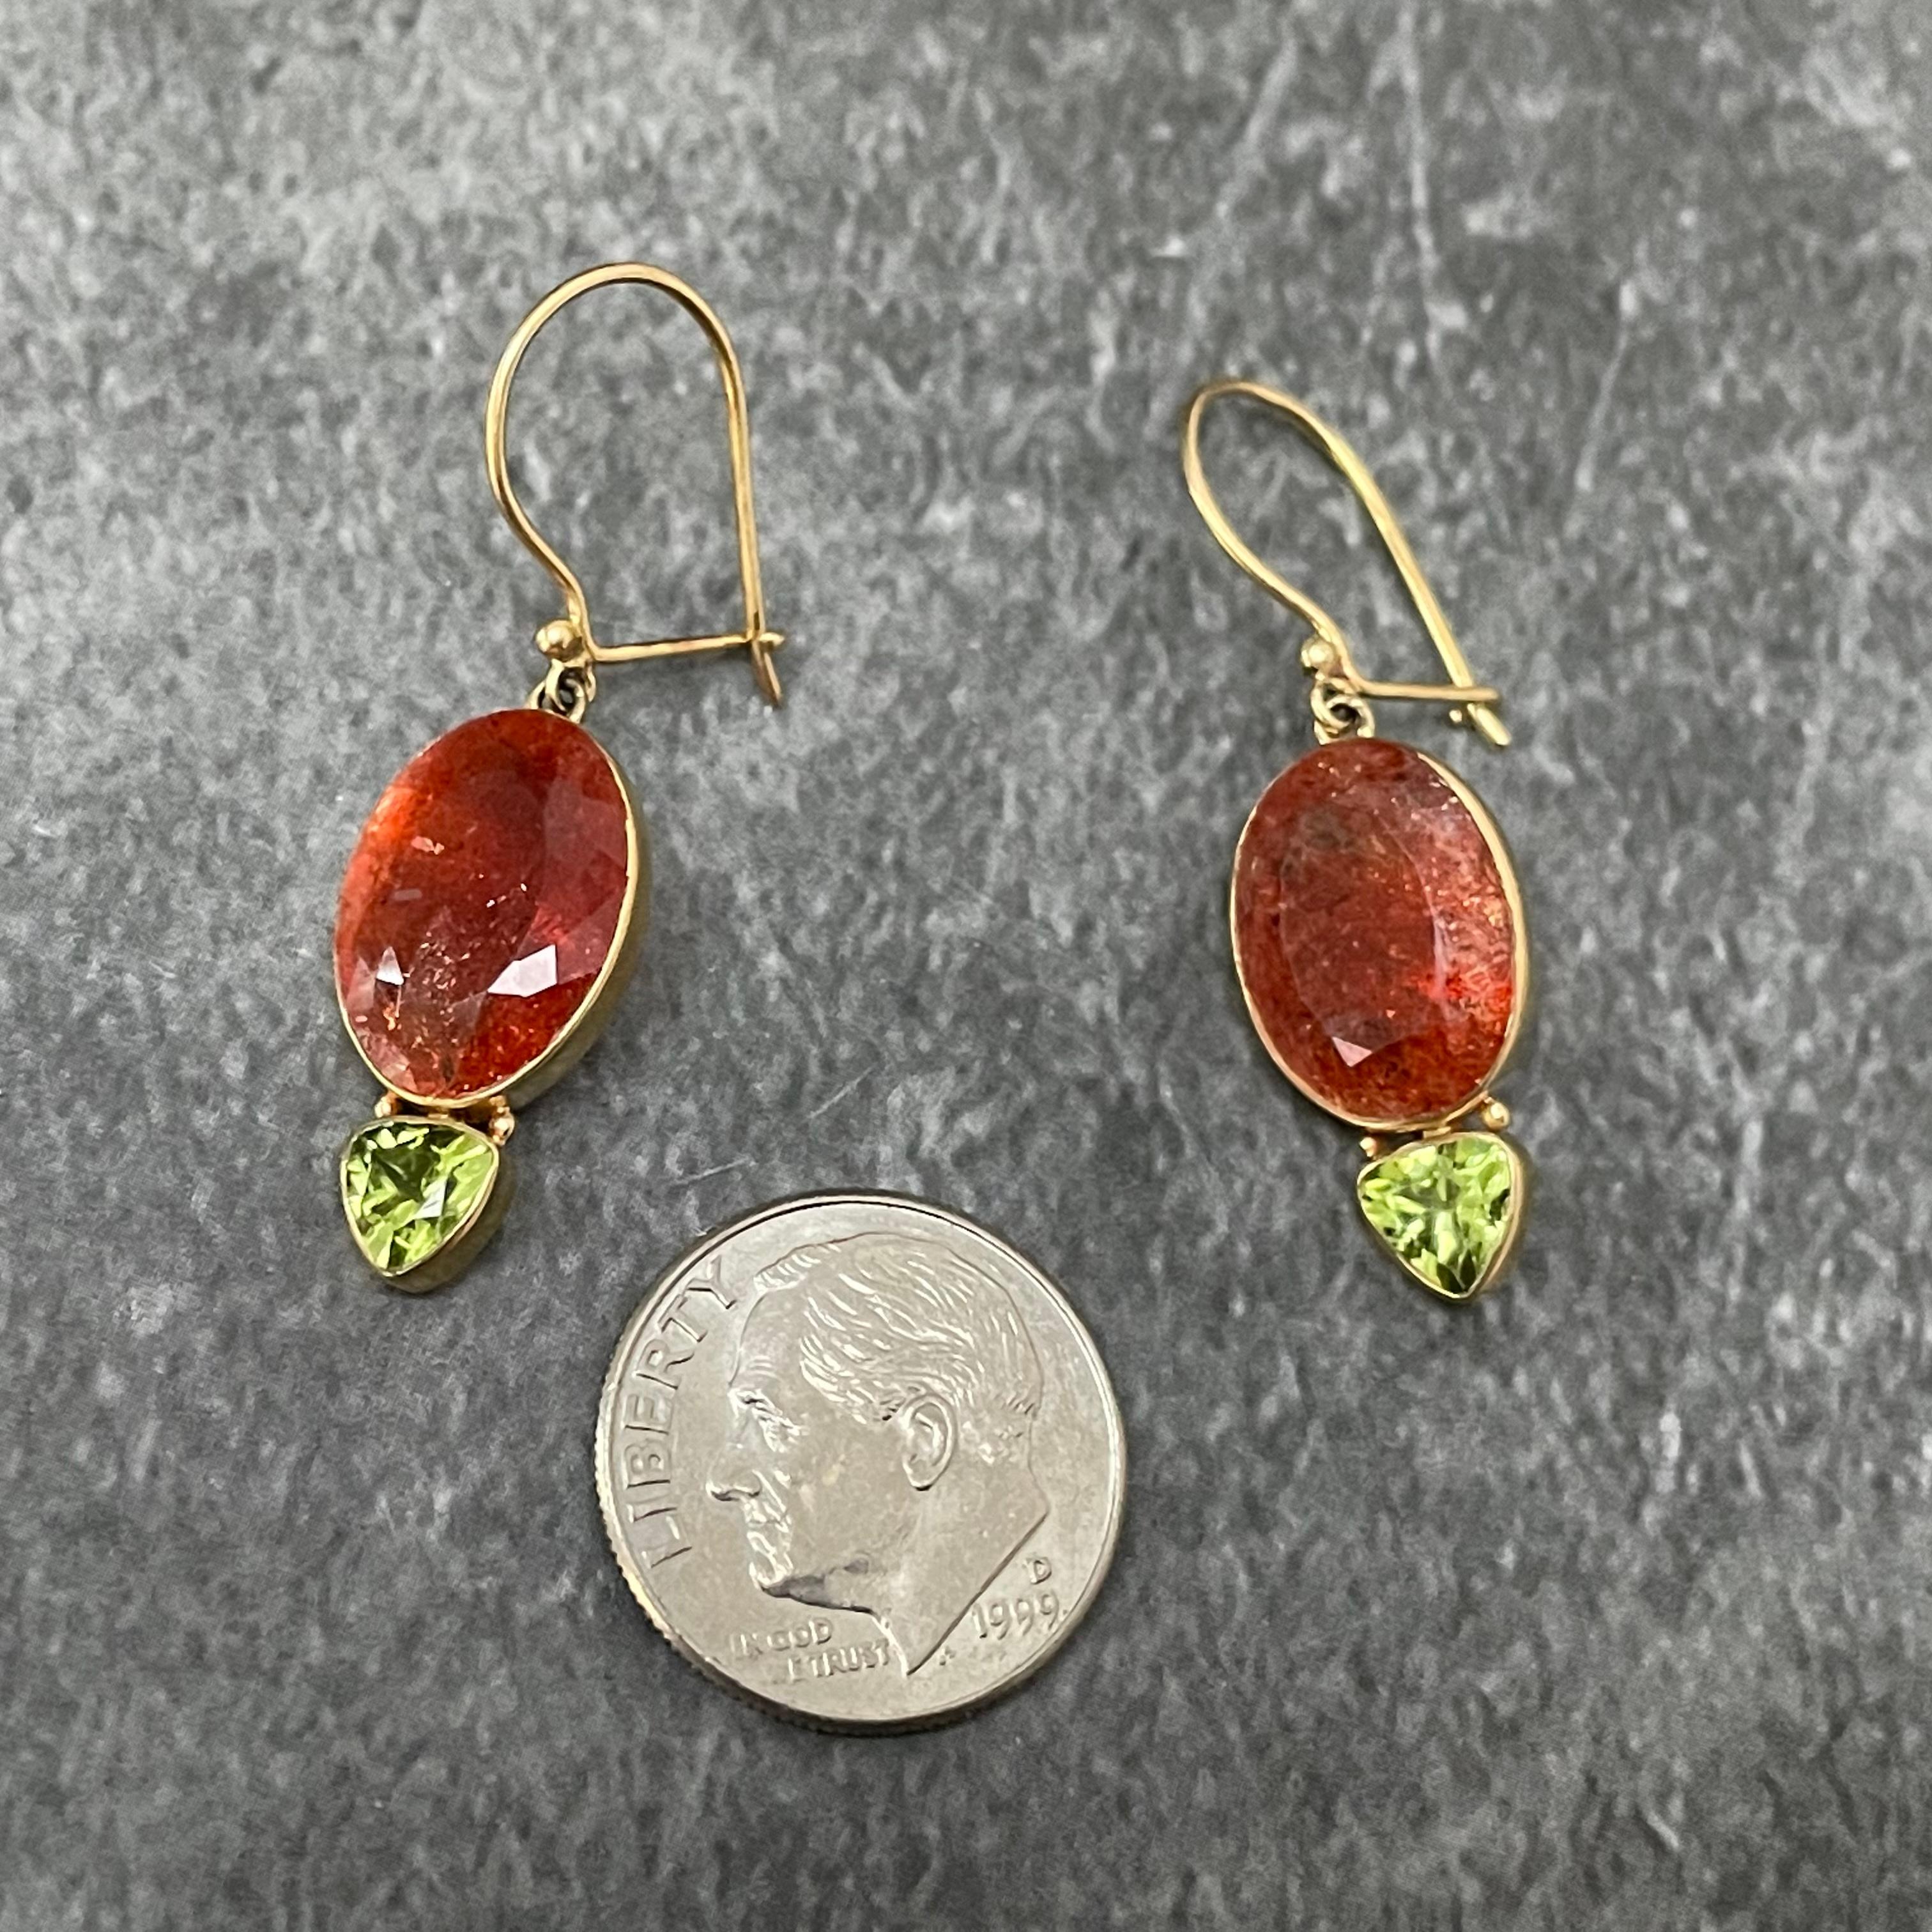 Beautiful complementary colors of 10 x 14 mm oval faceted sunstone and 5mm trillium facet peridot are suspended below safety clasp 18K gold ear wires in this unique pairing of orange and light green. Sure to be noticed!